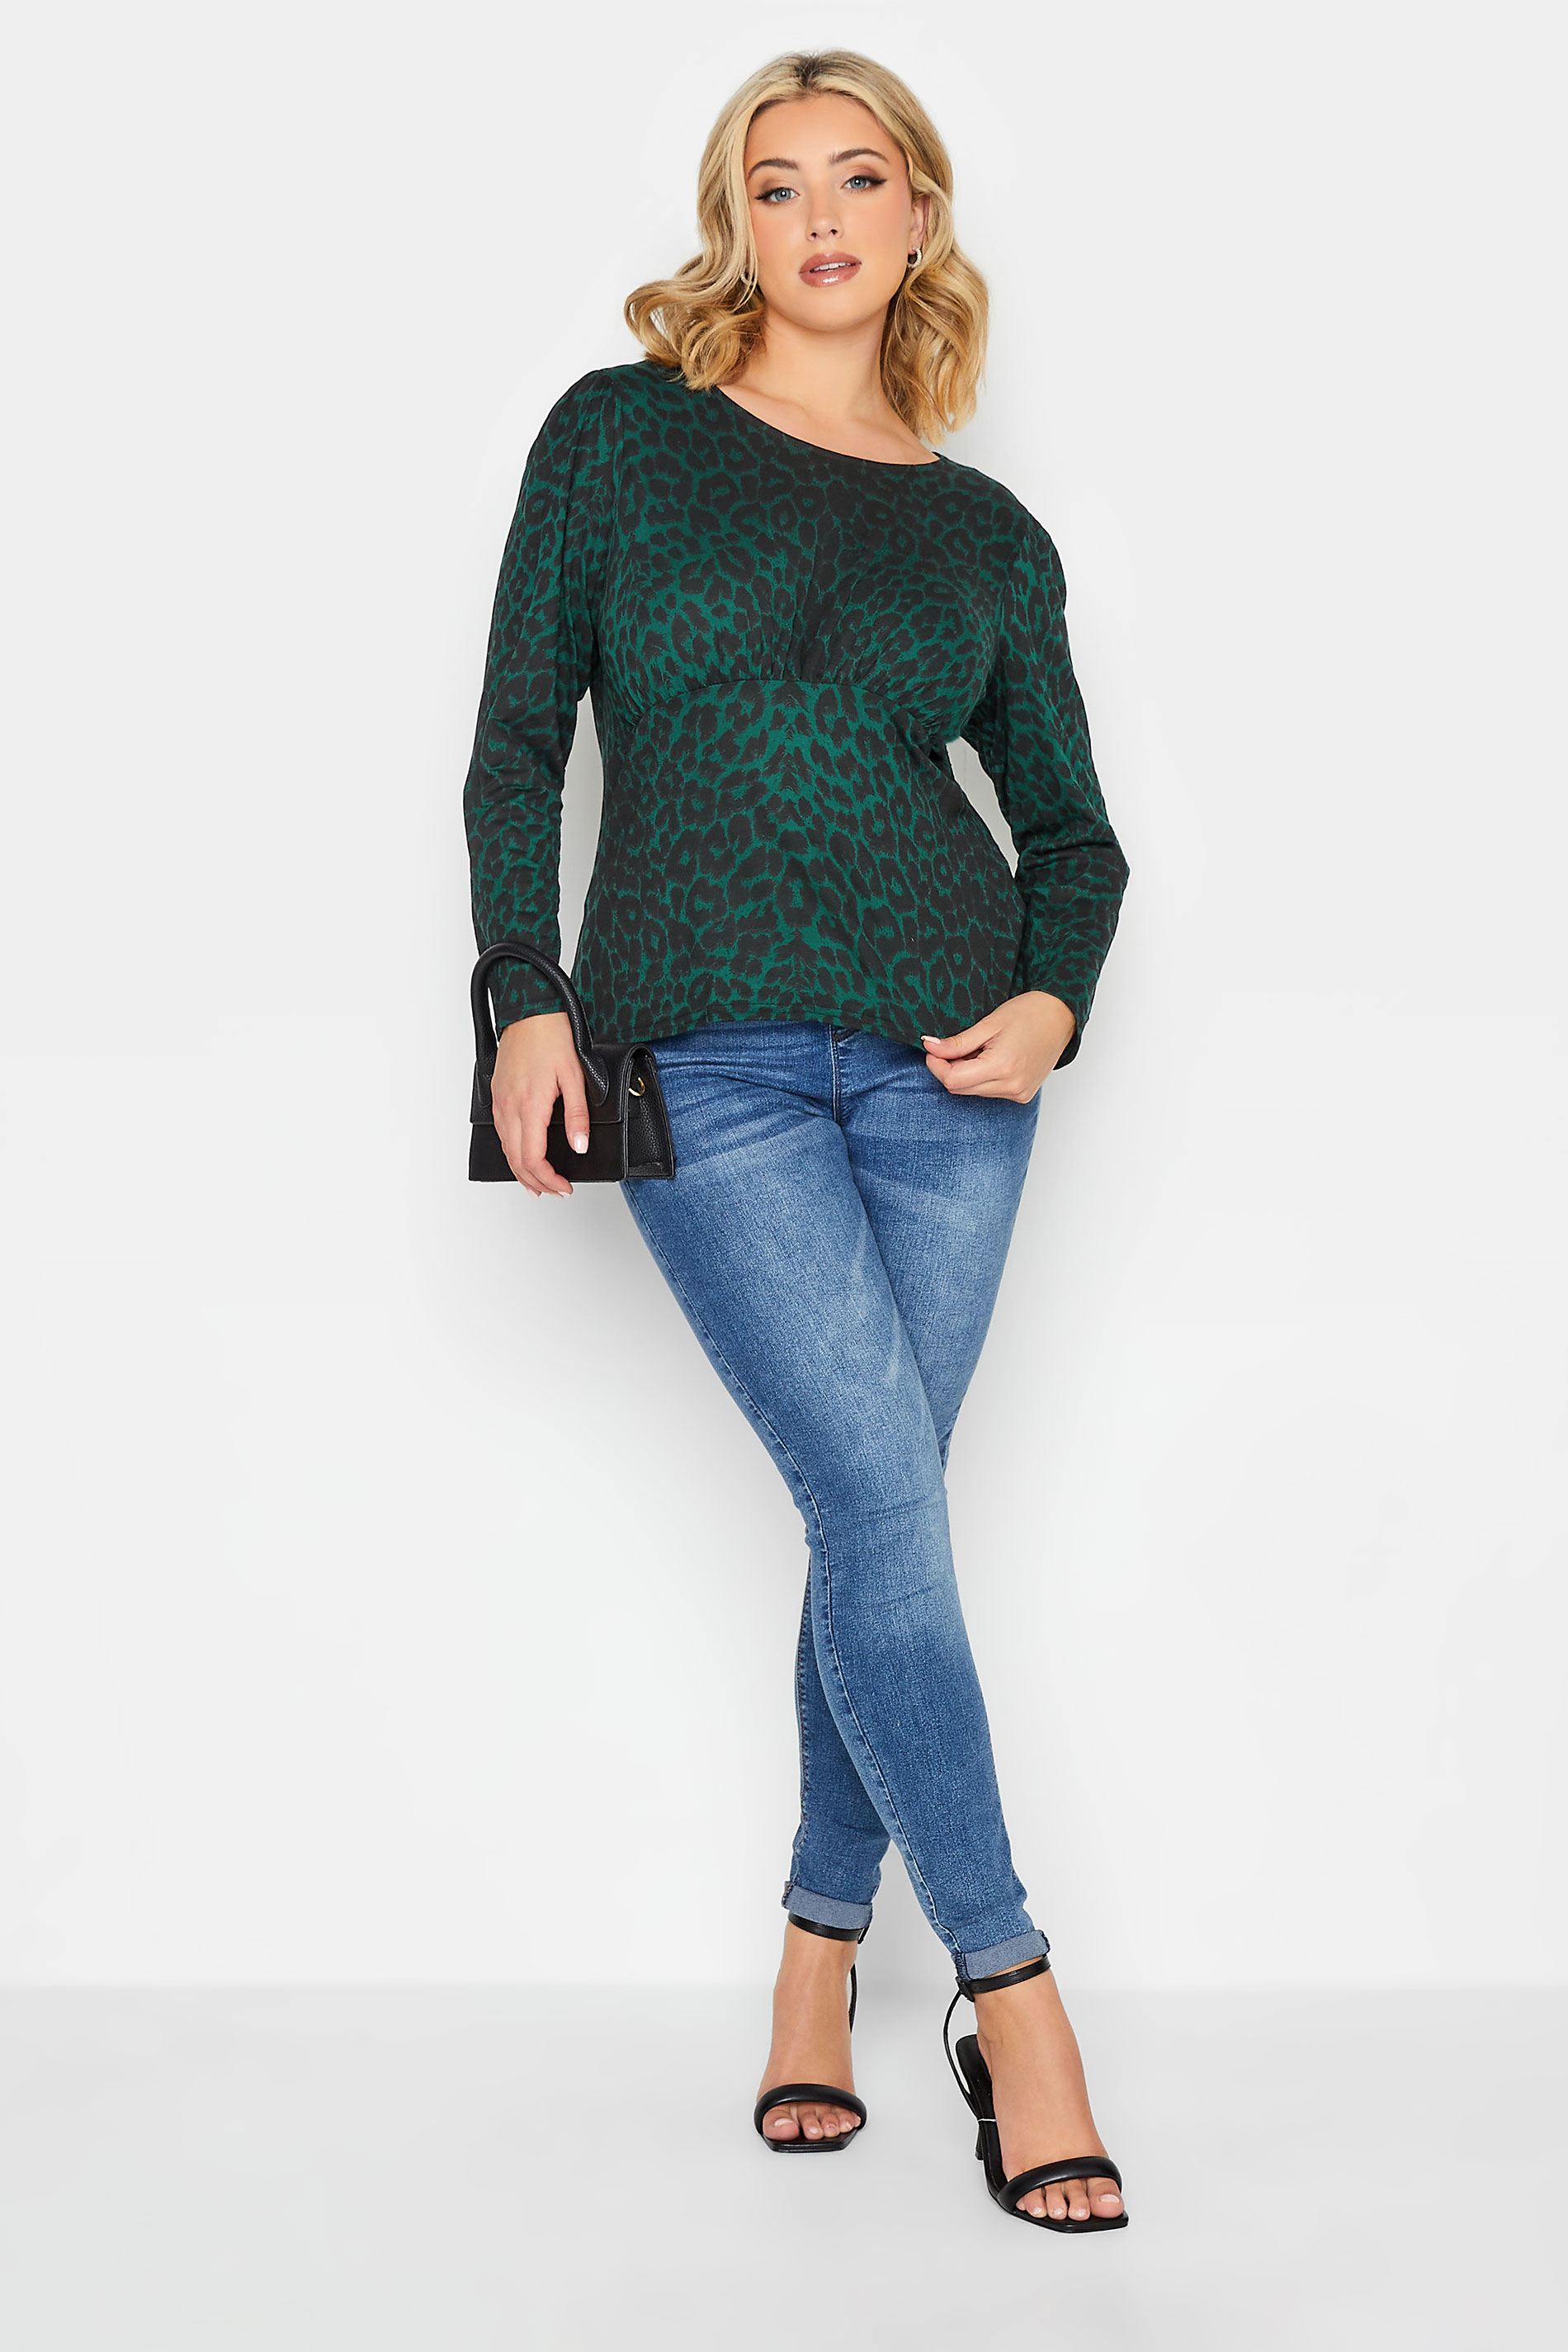 YOURS PETITE Curve Plus Size Green Animal Print Long Sleeve Top | Yours Clothing  2